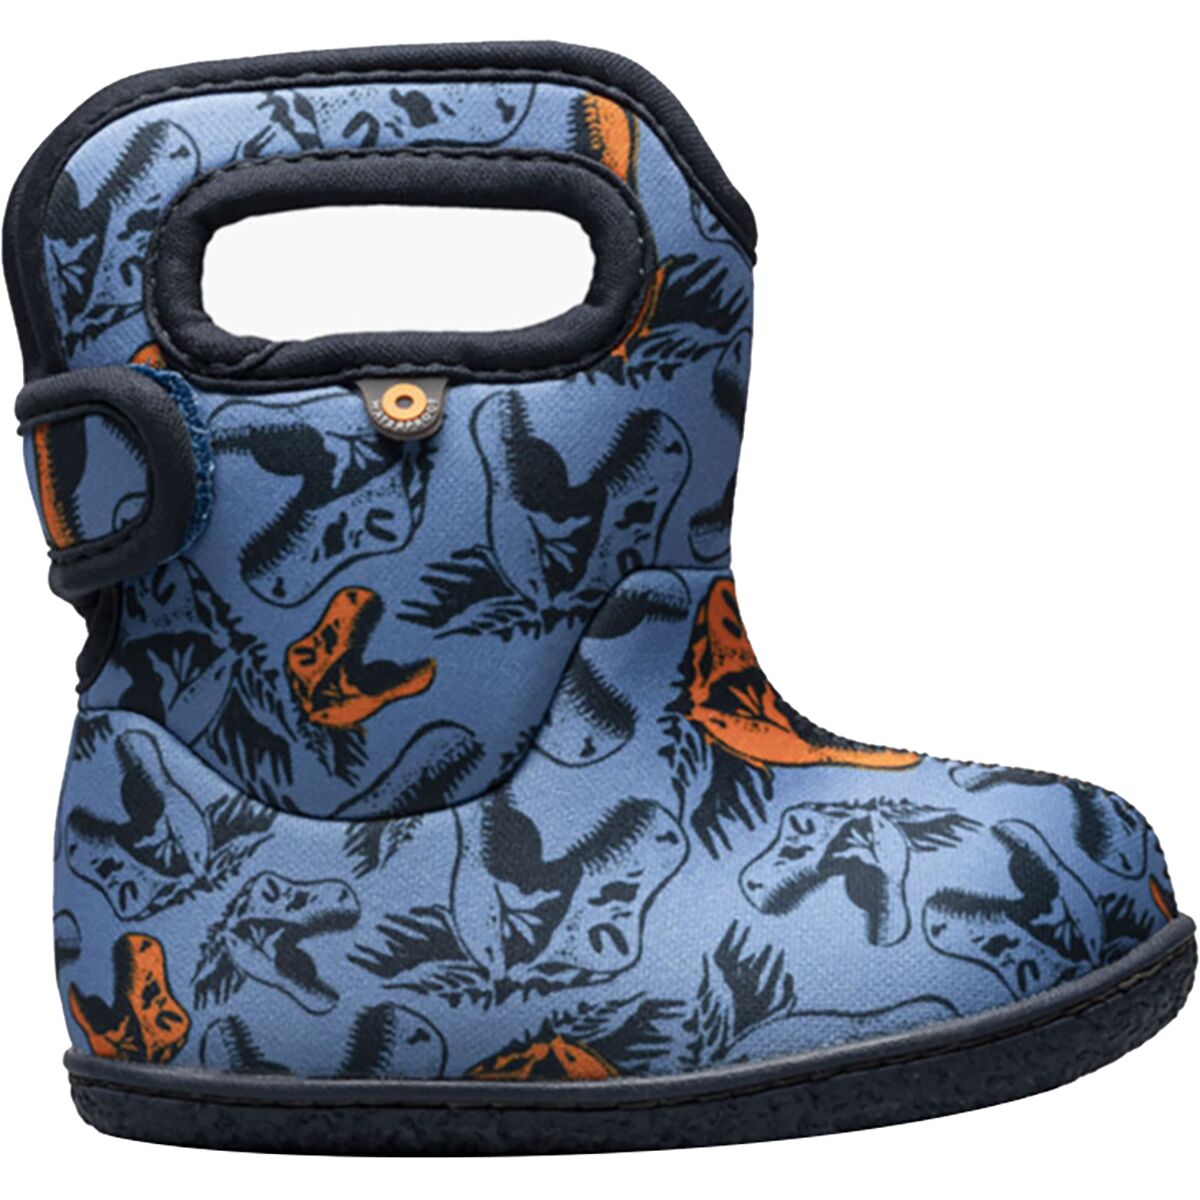 Bogs Baby Bogs Cool Dinos Boot - Infants'